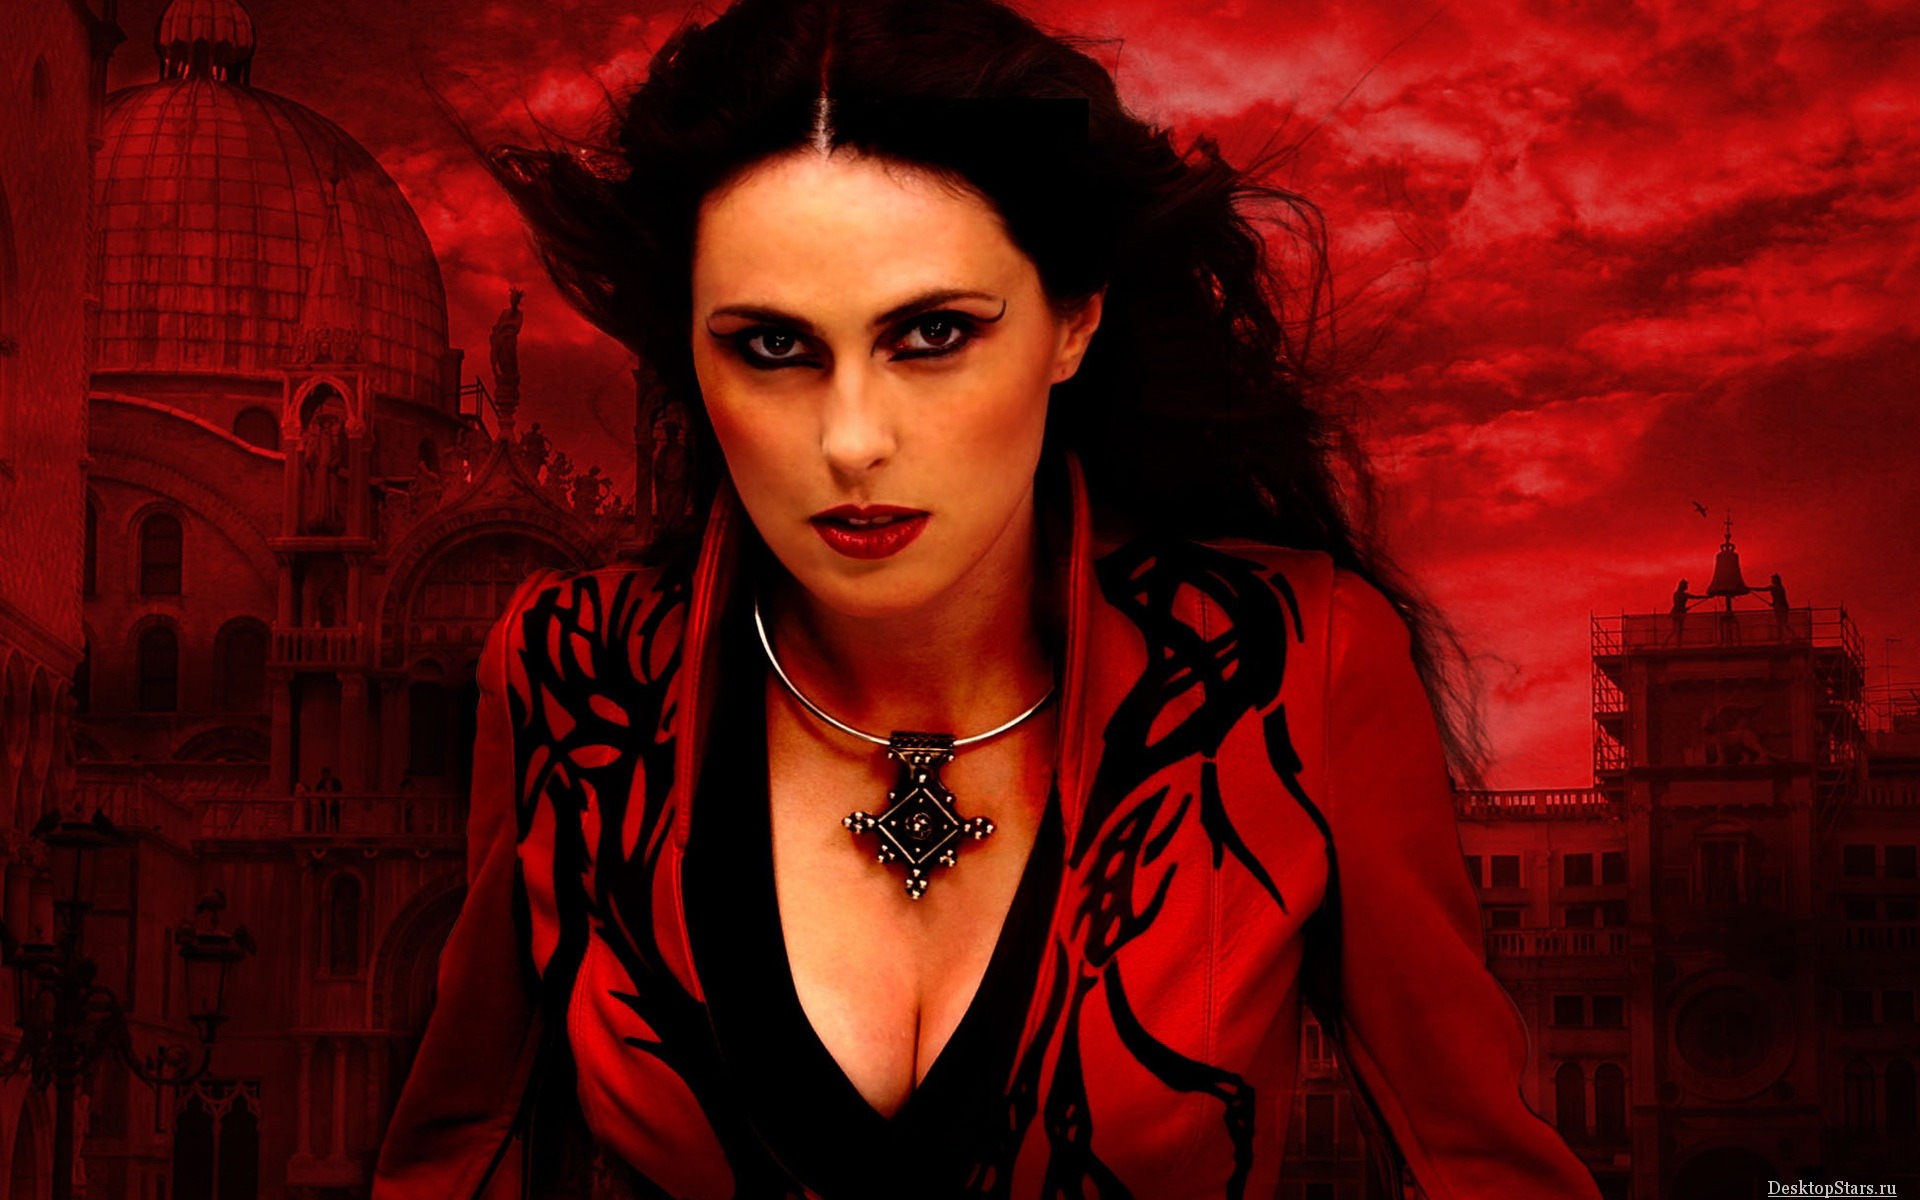 Sharon den Adel #009 - 1920x1200 Wallpapers Pictures Photos Images